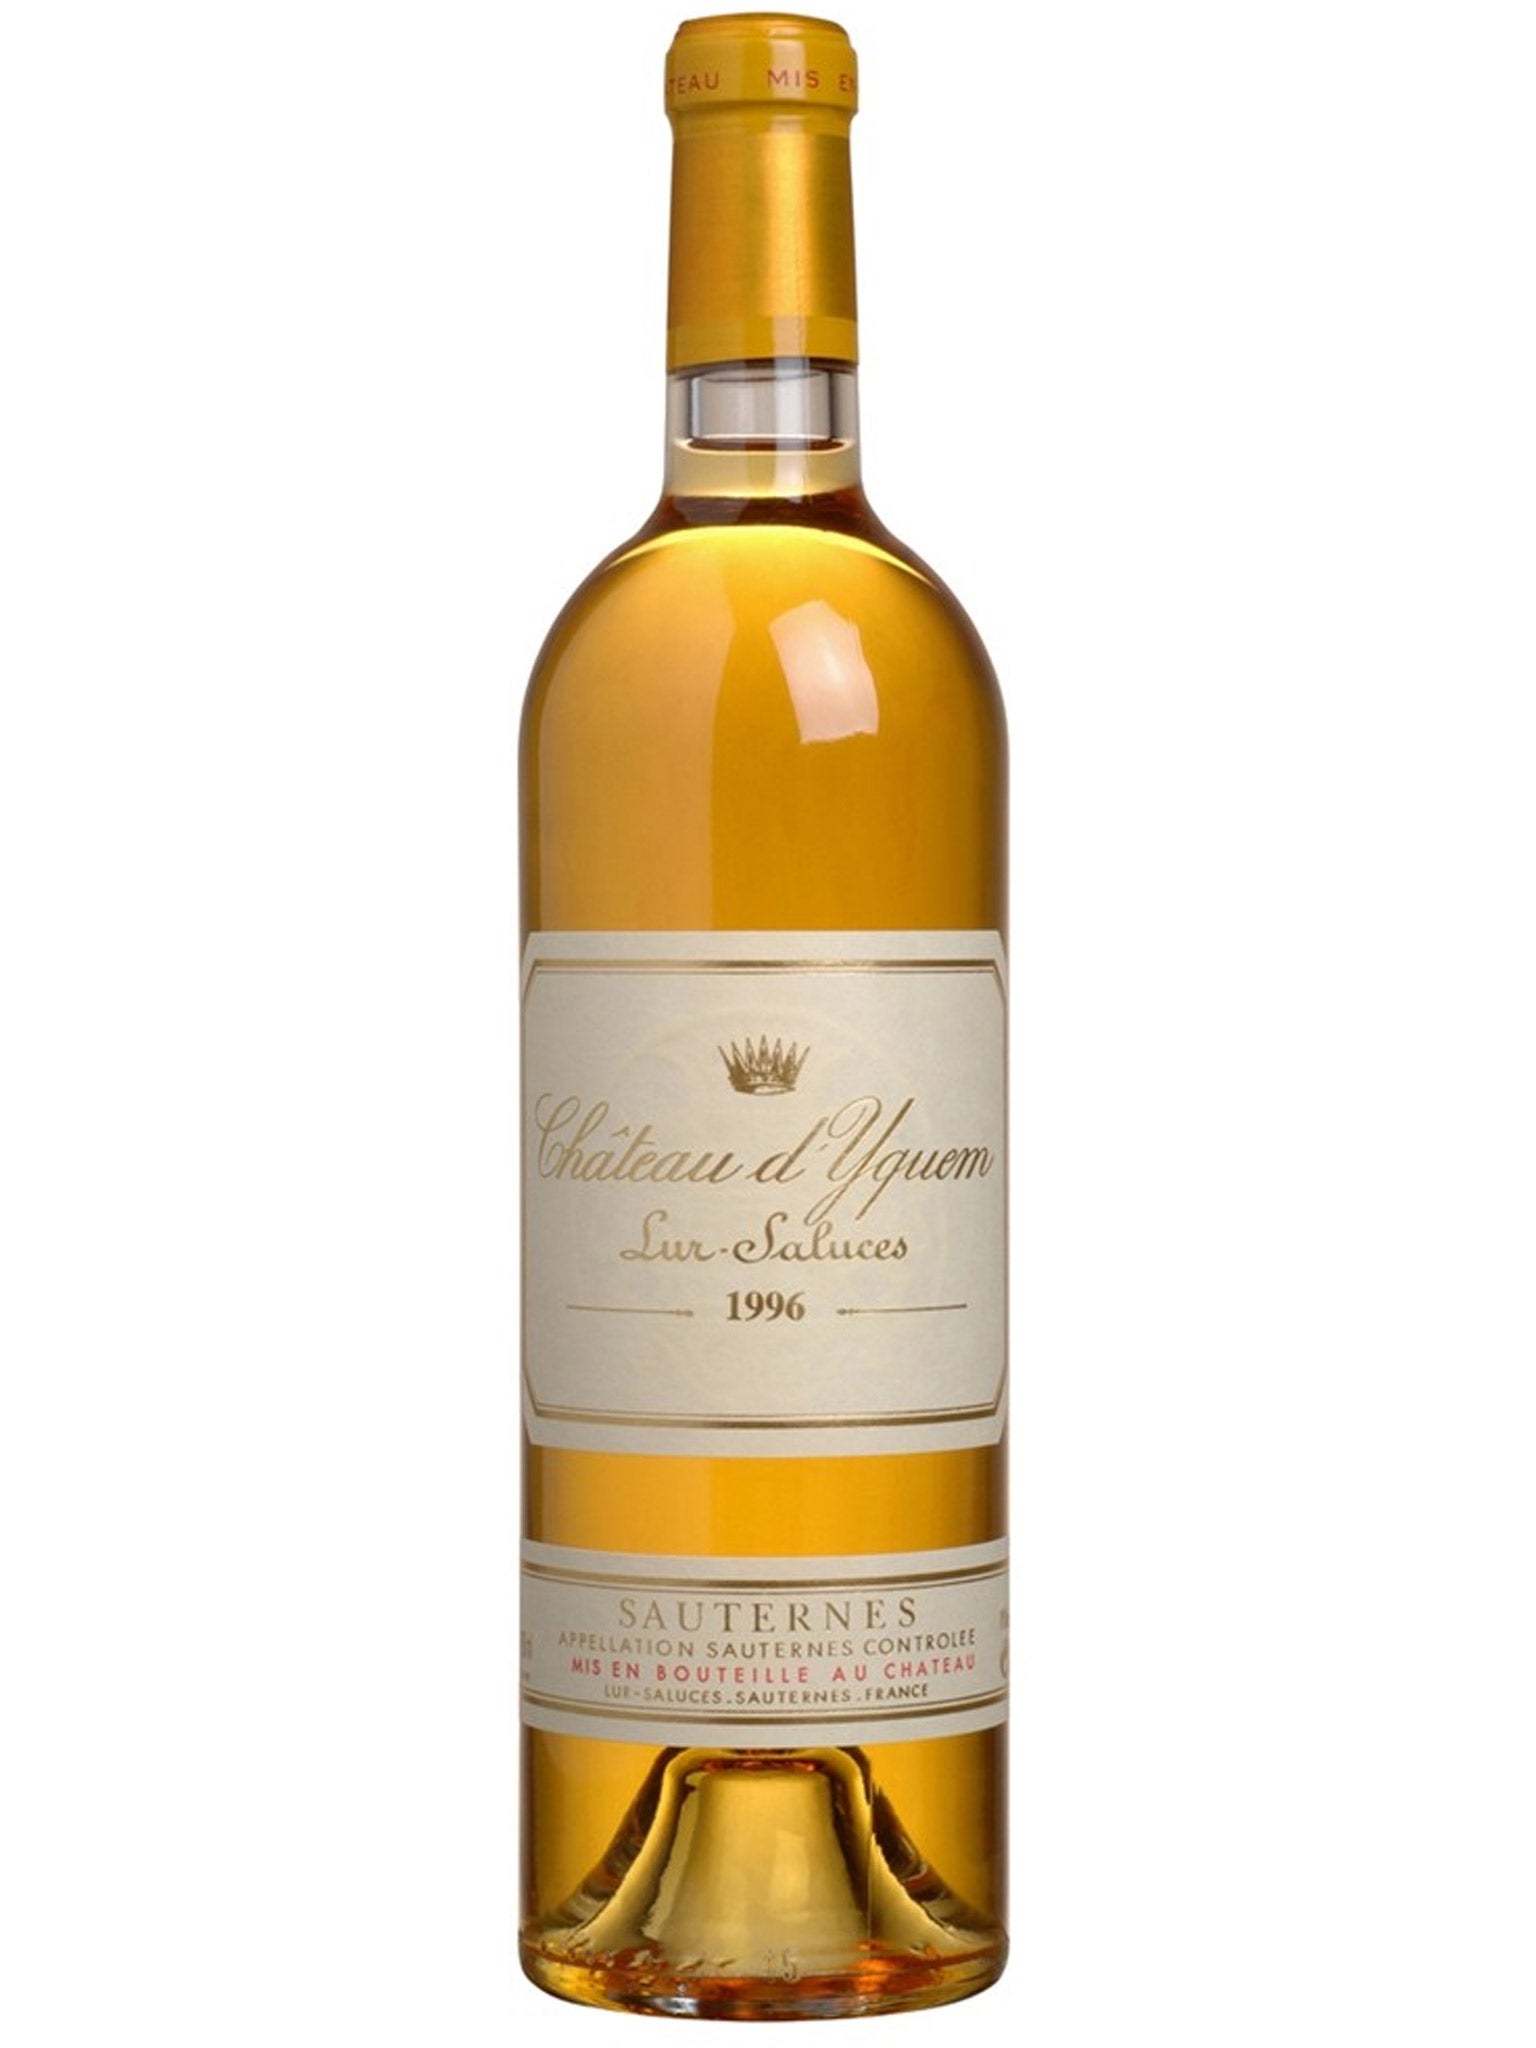 Chateau d’Yquem vintages were also binned in 1952, 1972 and 1992